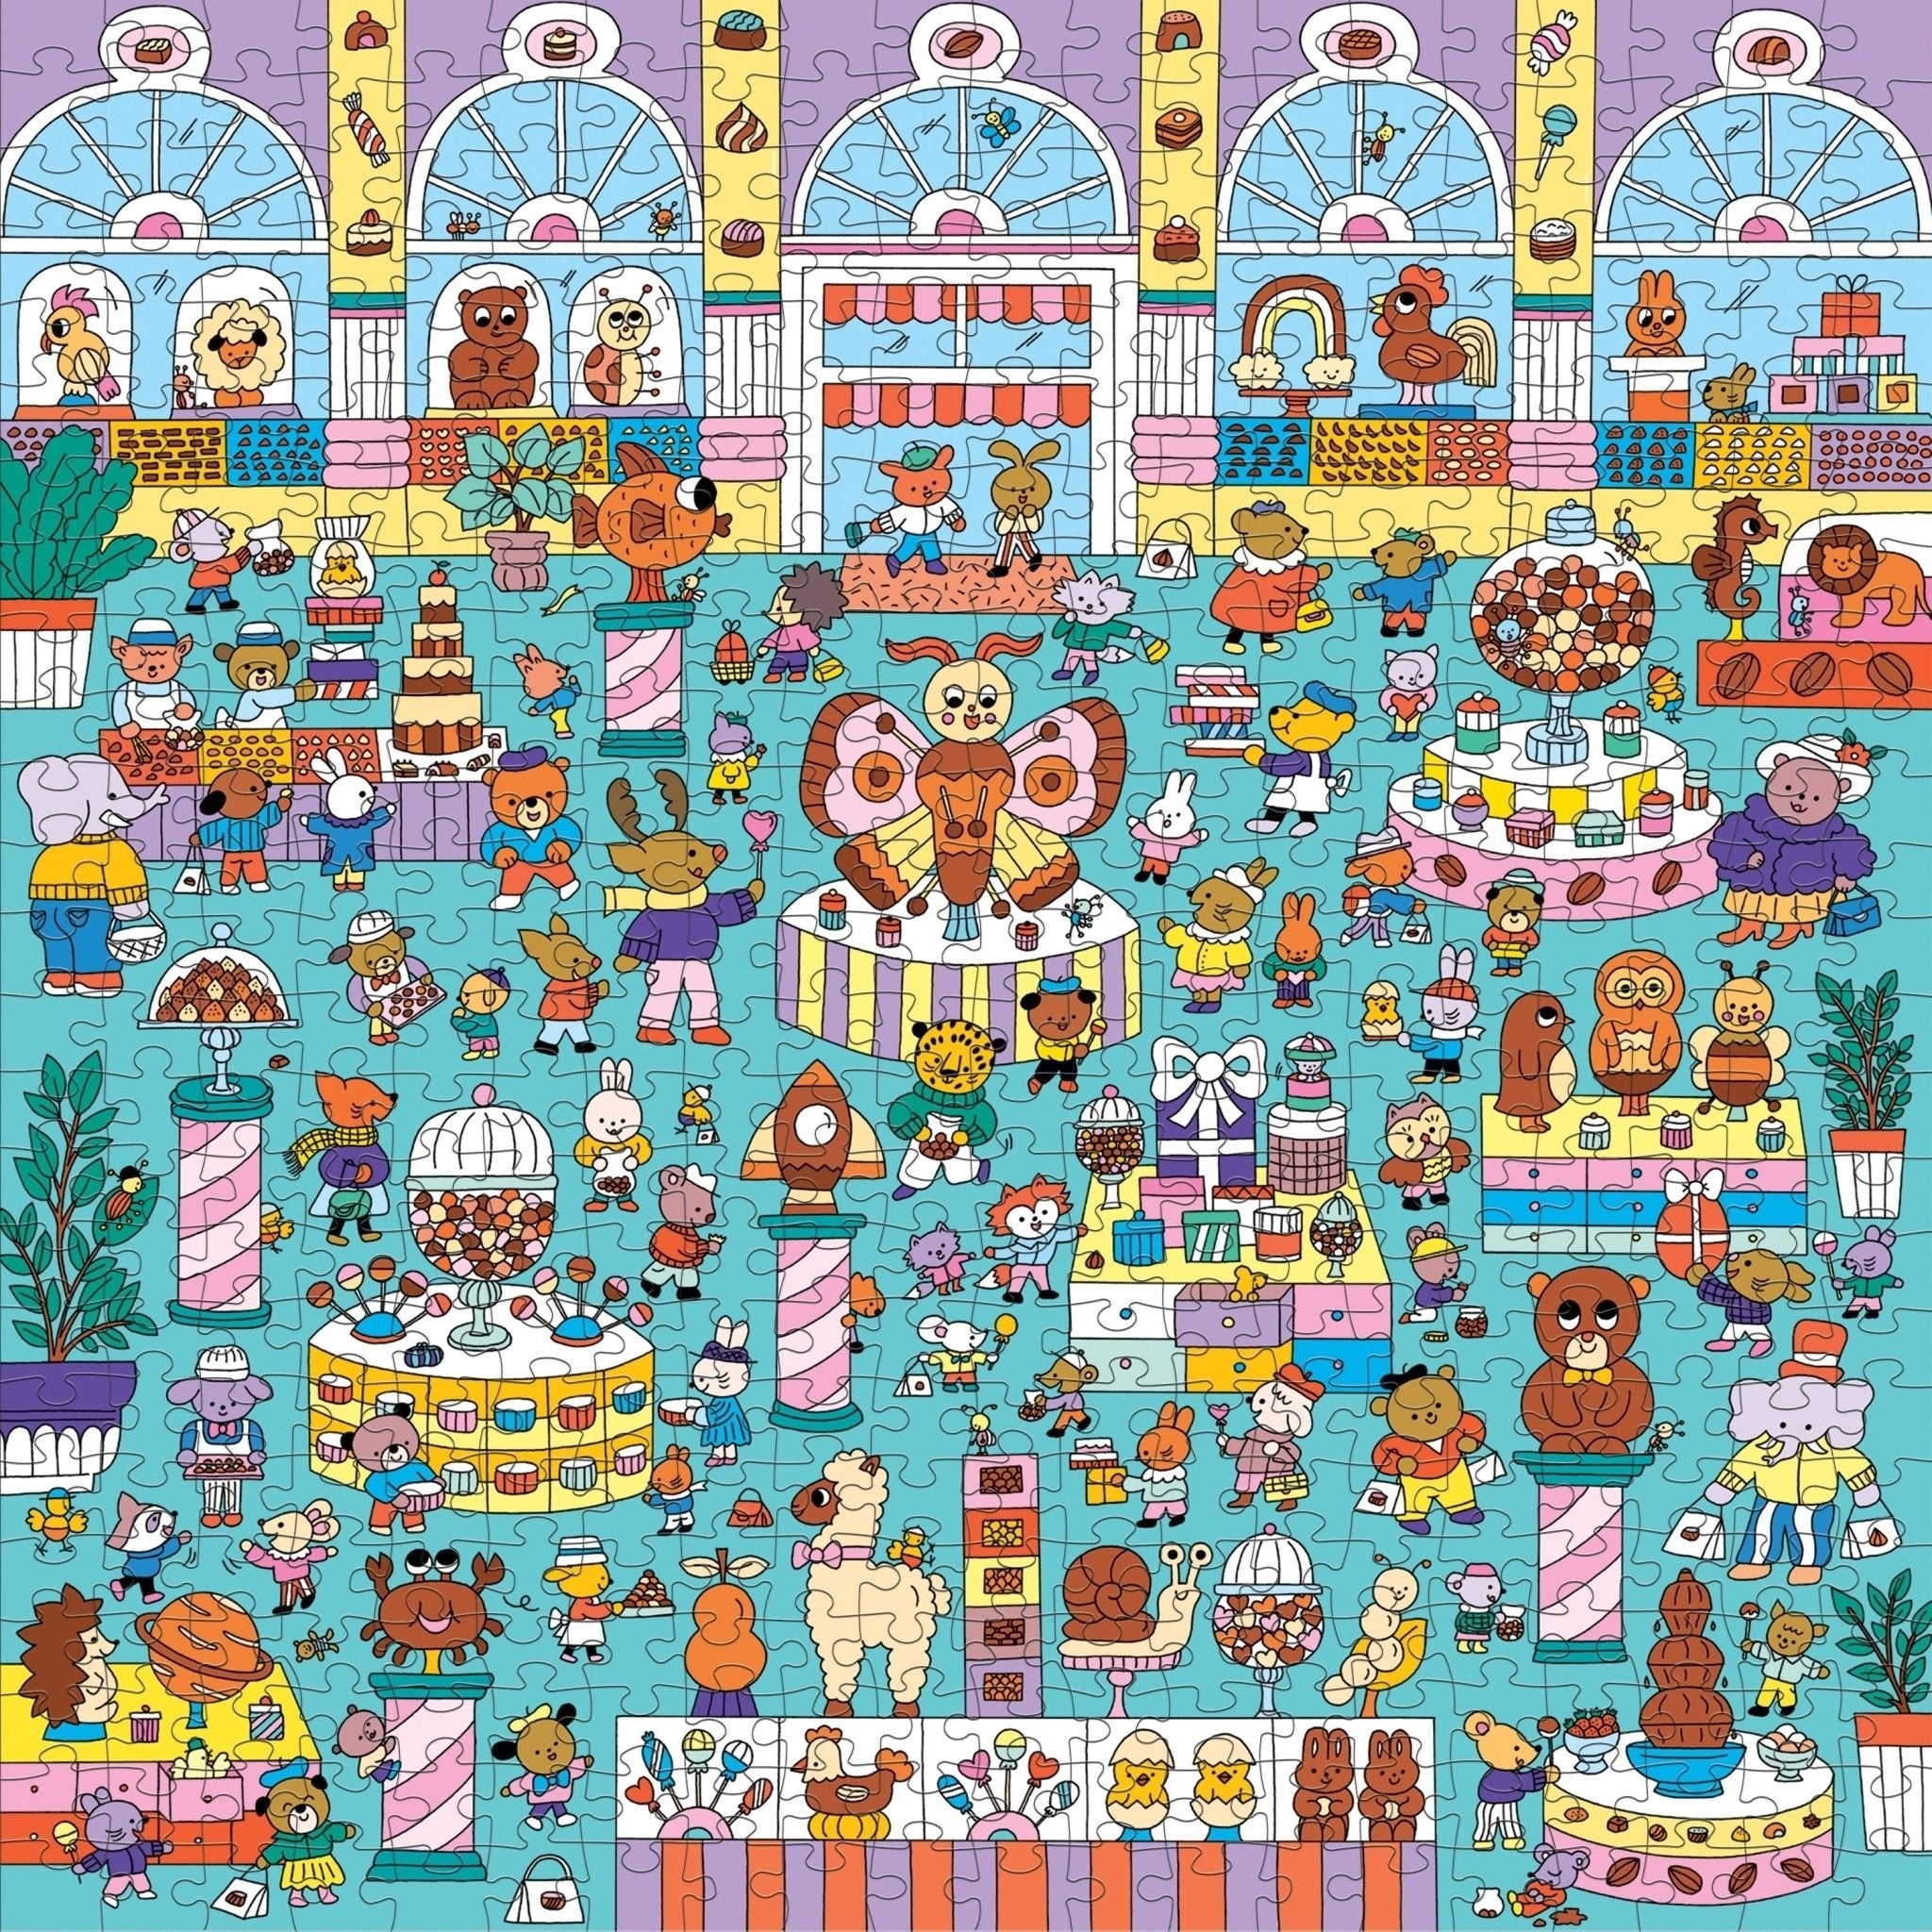 the puzzle put together, with a cute illustration of a busy chocolate shop